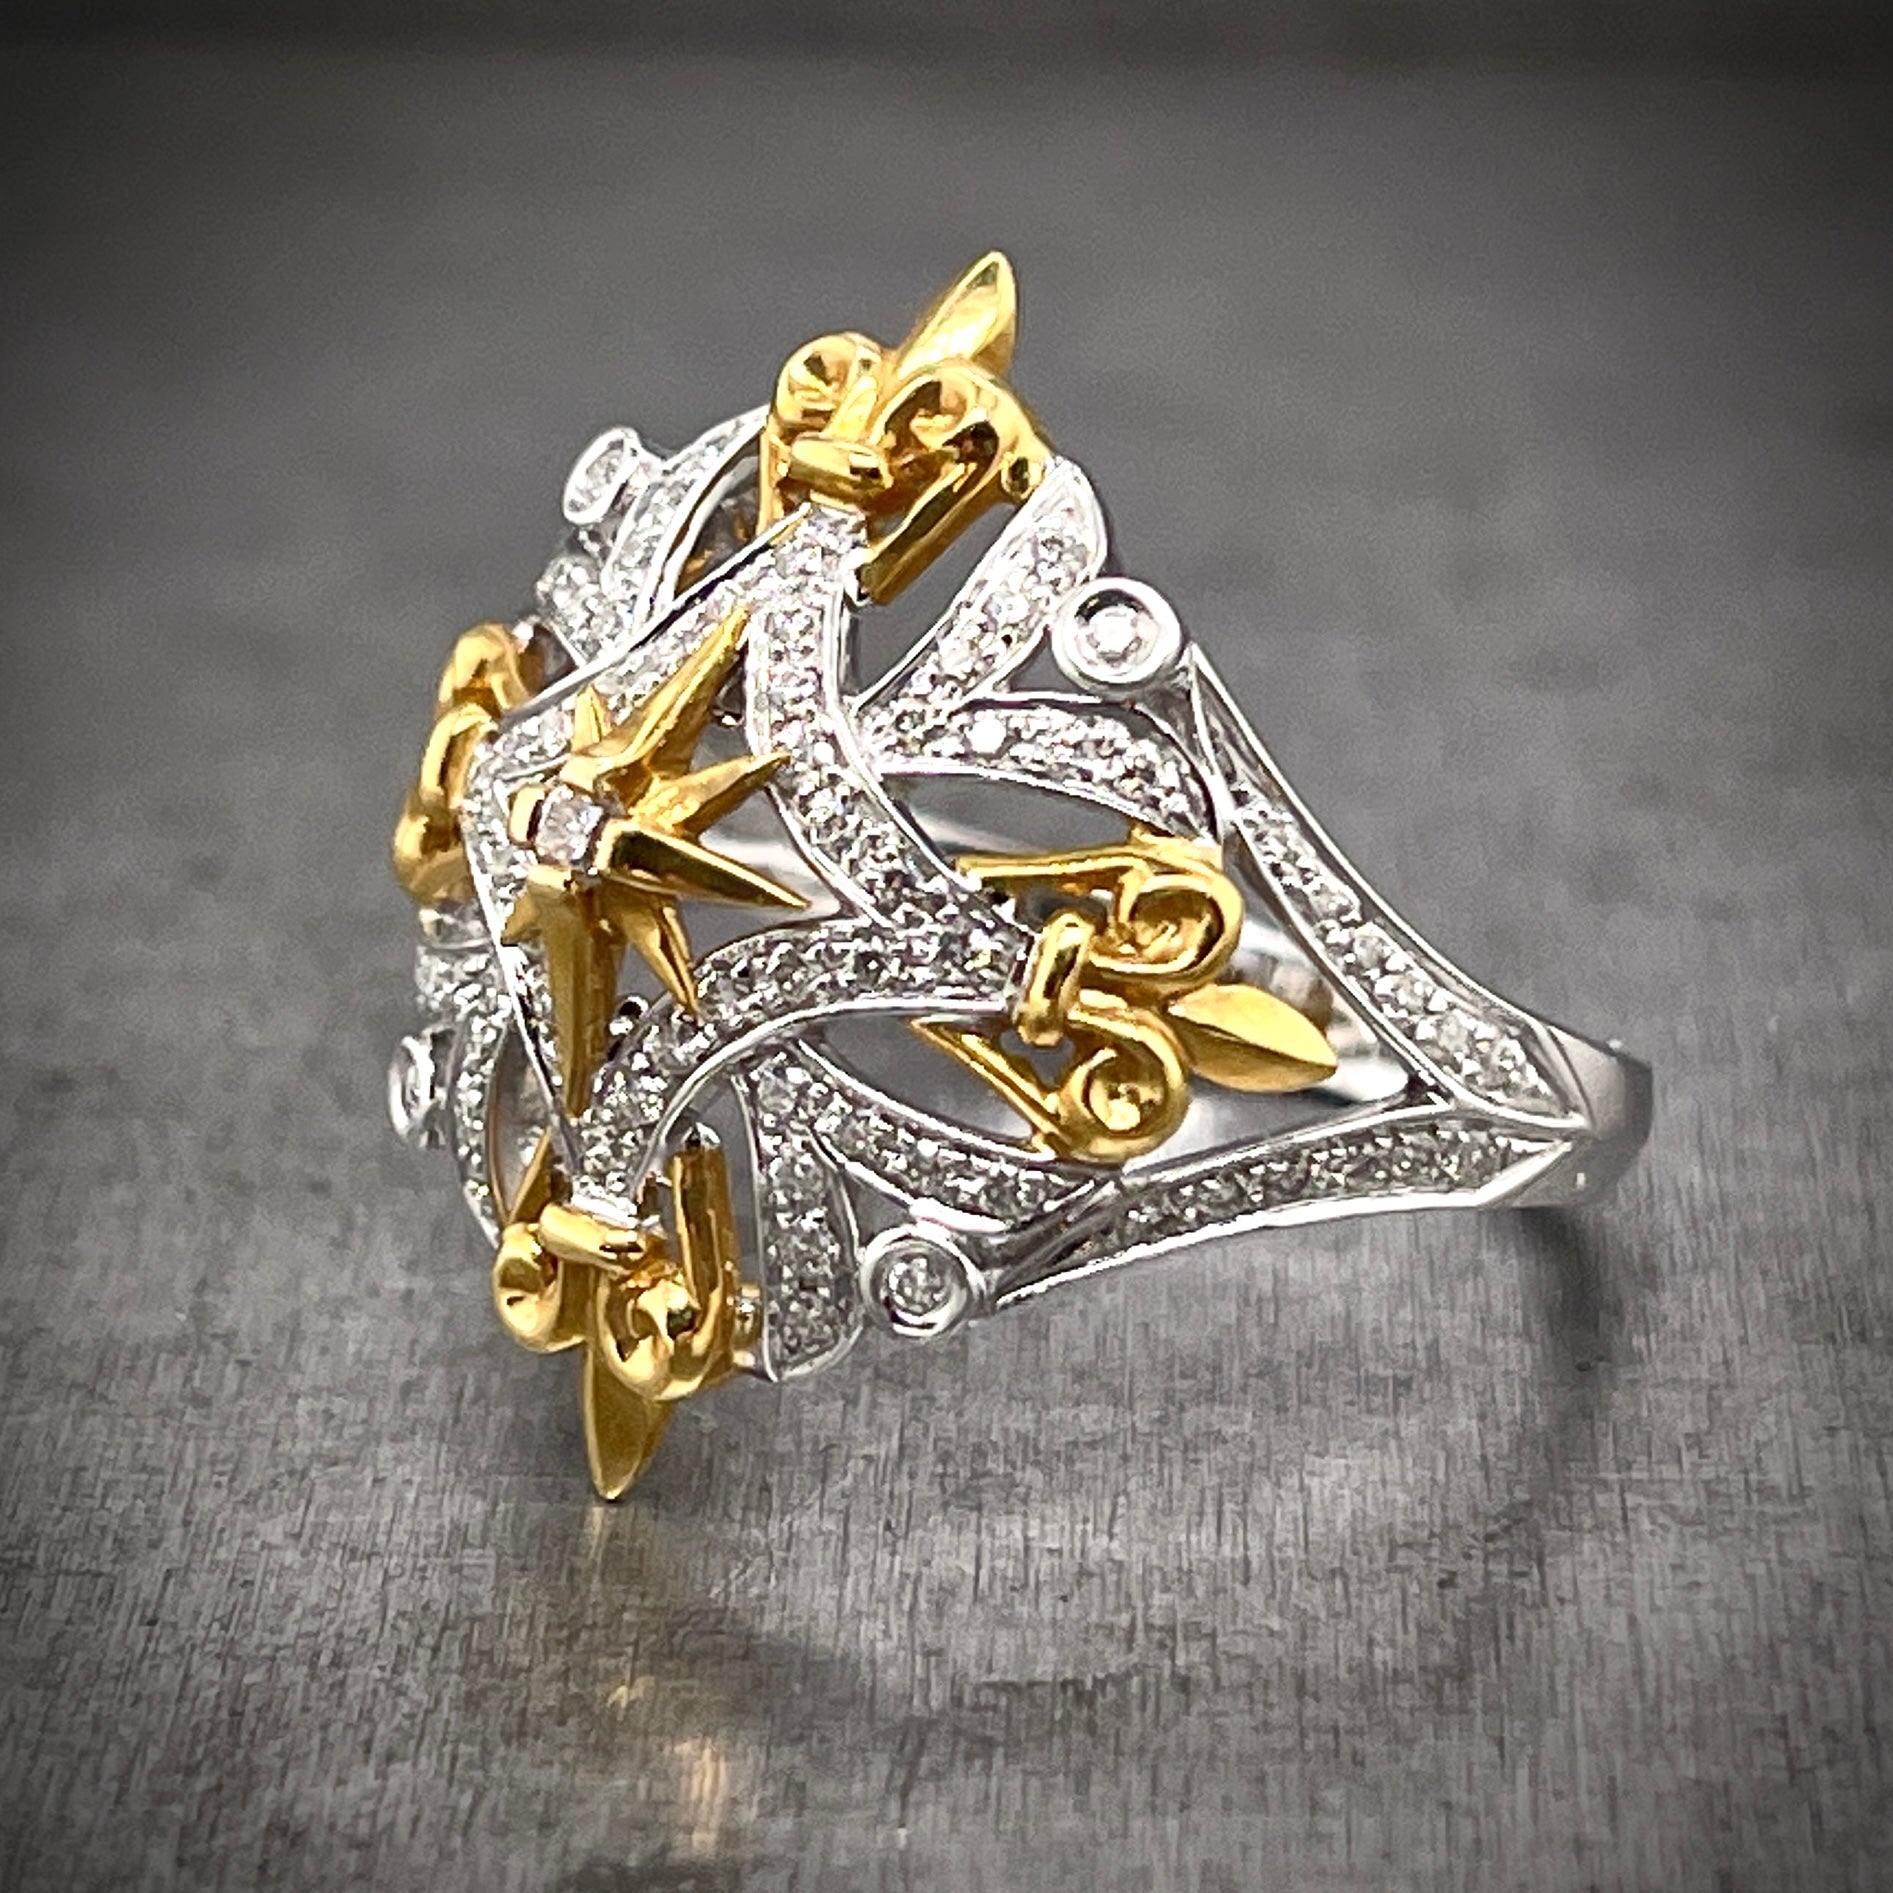 3/4 profile view of Fleur-de-lis ring. Here you can see the diamonds only reach to the shoulder of the ring, and do not extend past them.